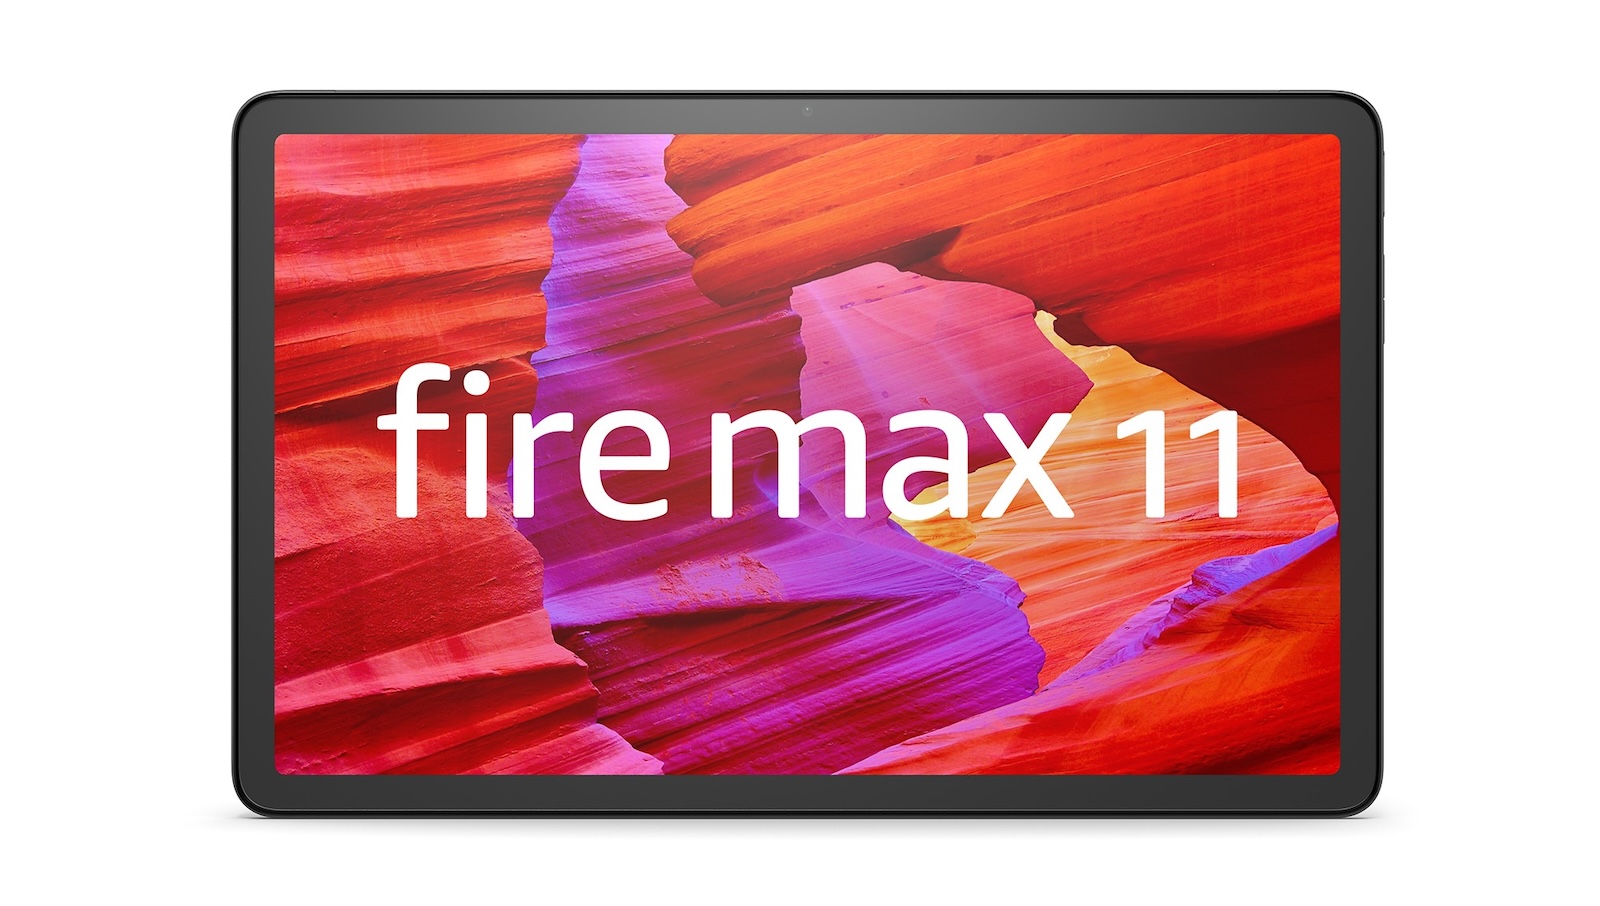 Fire max 11 new feature